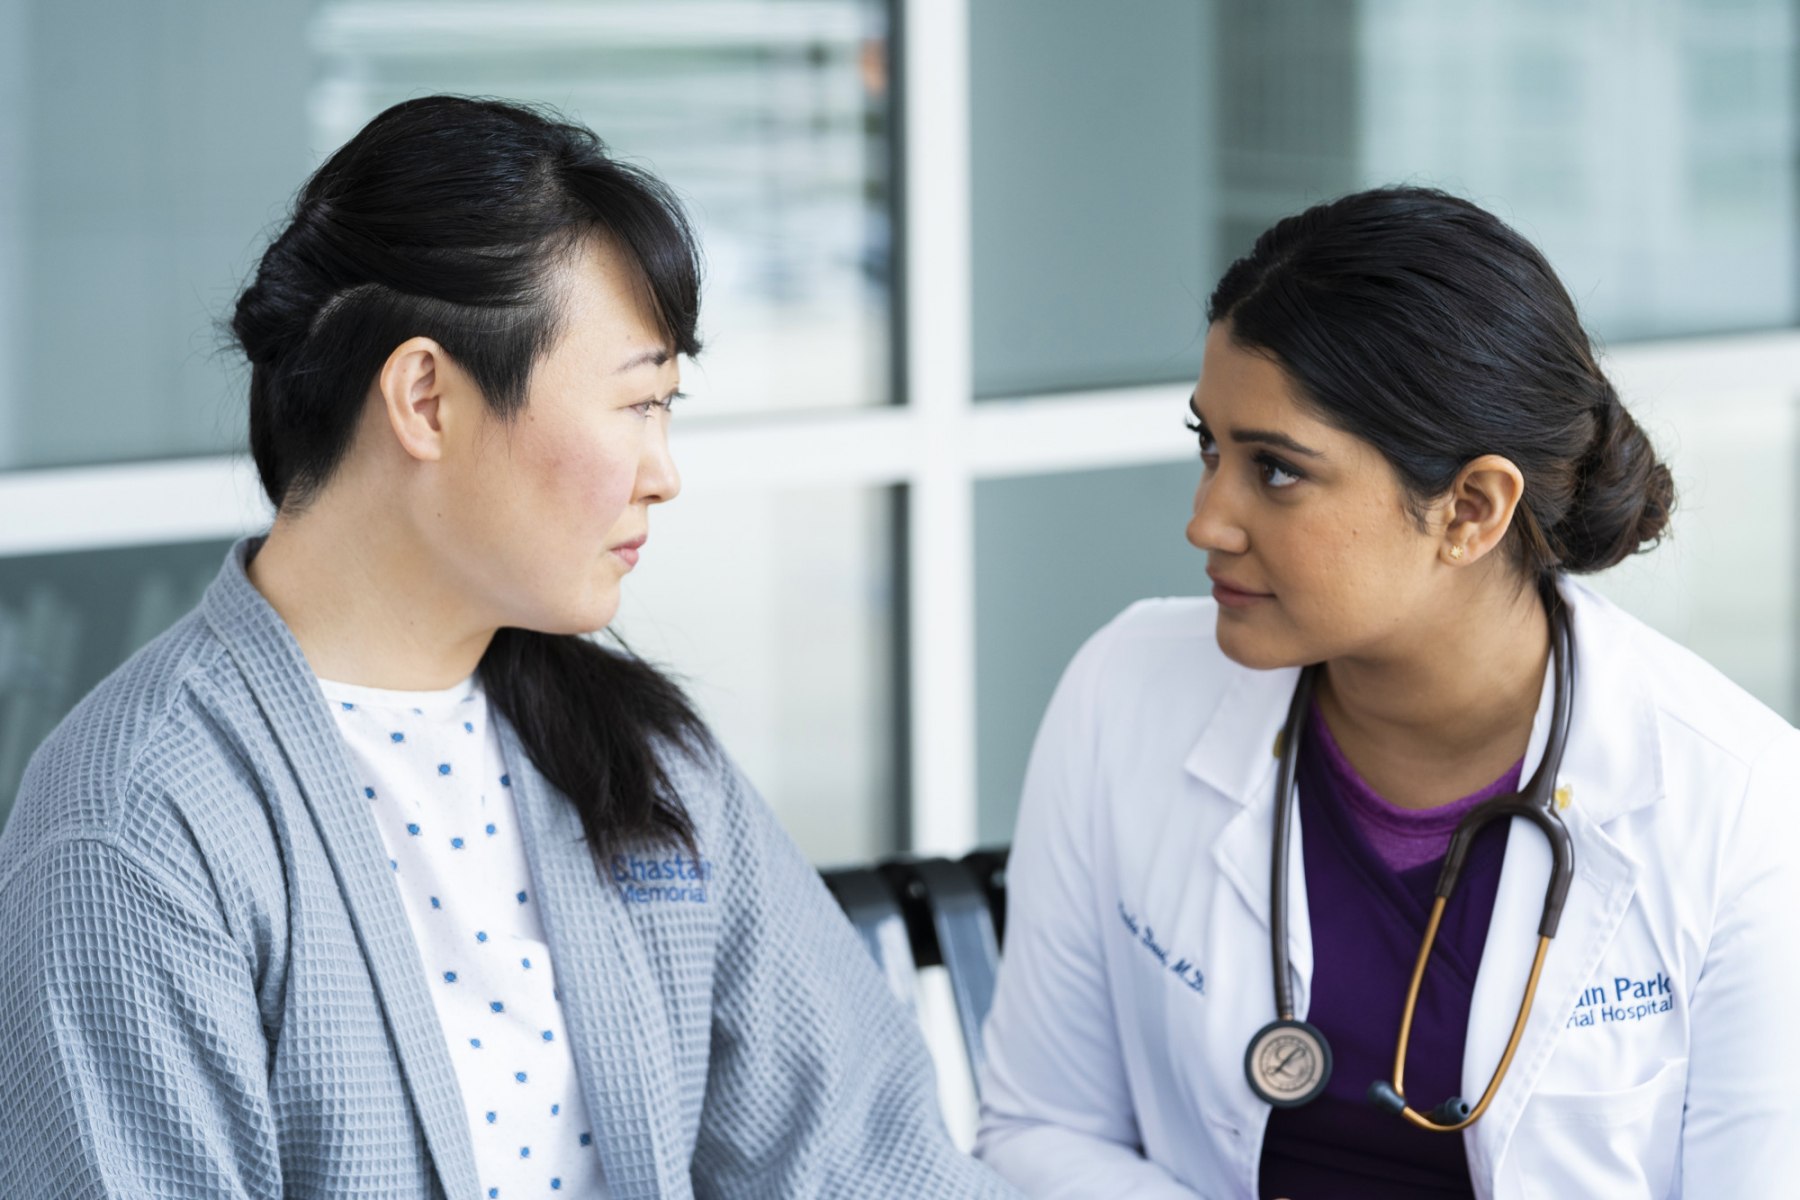 THE RESIDENT: L-R:  Anuja Joshi and Julia Cho in the “He’d Really Like to put in a Central Line“ episode of THE RESIDENT airing Tuesday, Nov. 30 (8:00-9:00 PM ET/PT) on FOX. ©2021 Fox Media LLC Cr: Nathan Bolster/FOX